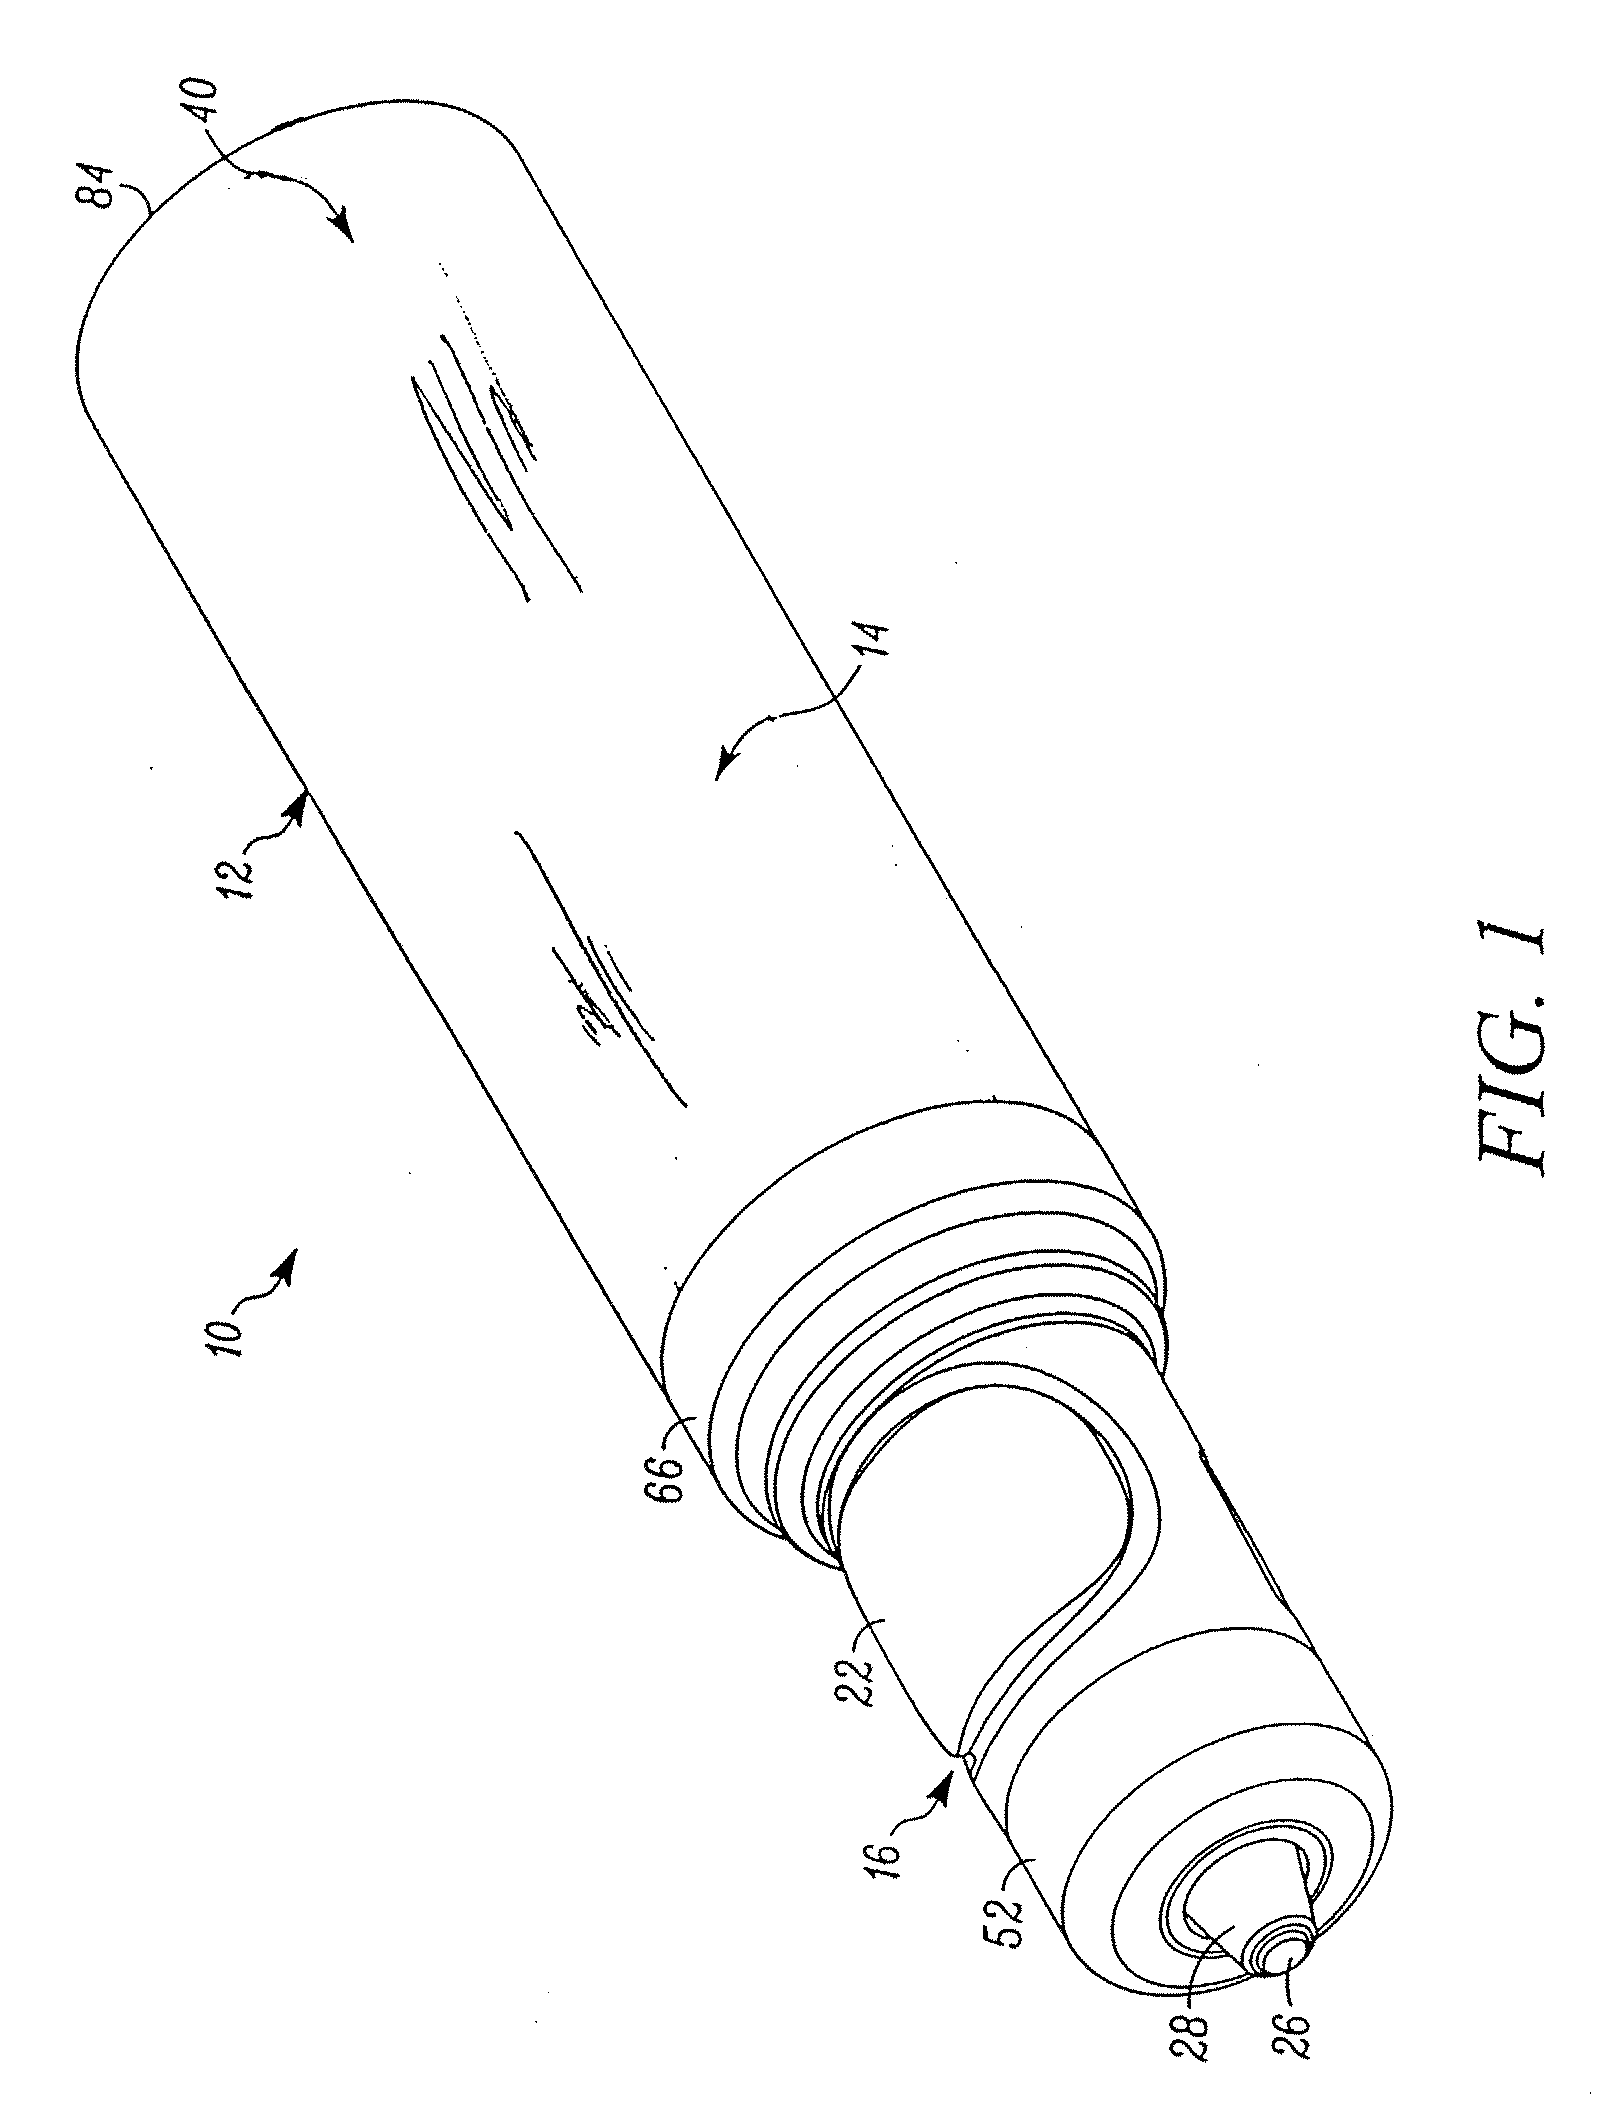 Multiple Dose Delivery Device with Manually Depressible Actuator and One-Way Valve for Storing and Dispensing Substances, and Related Method